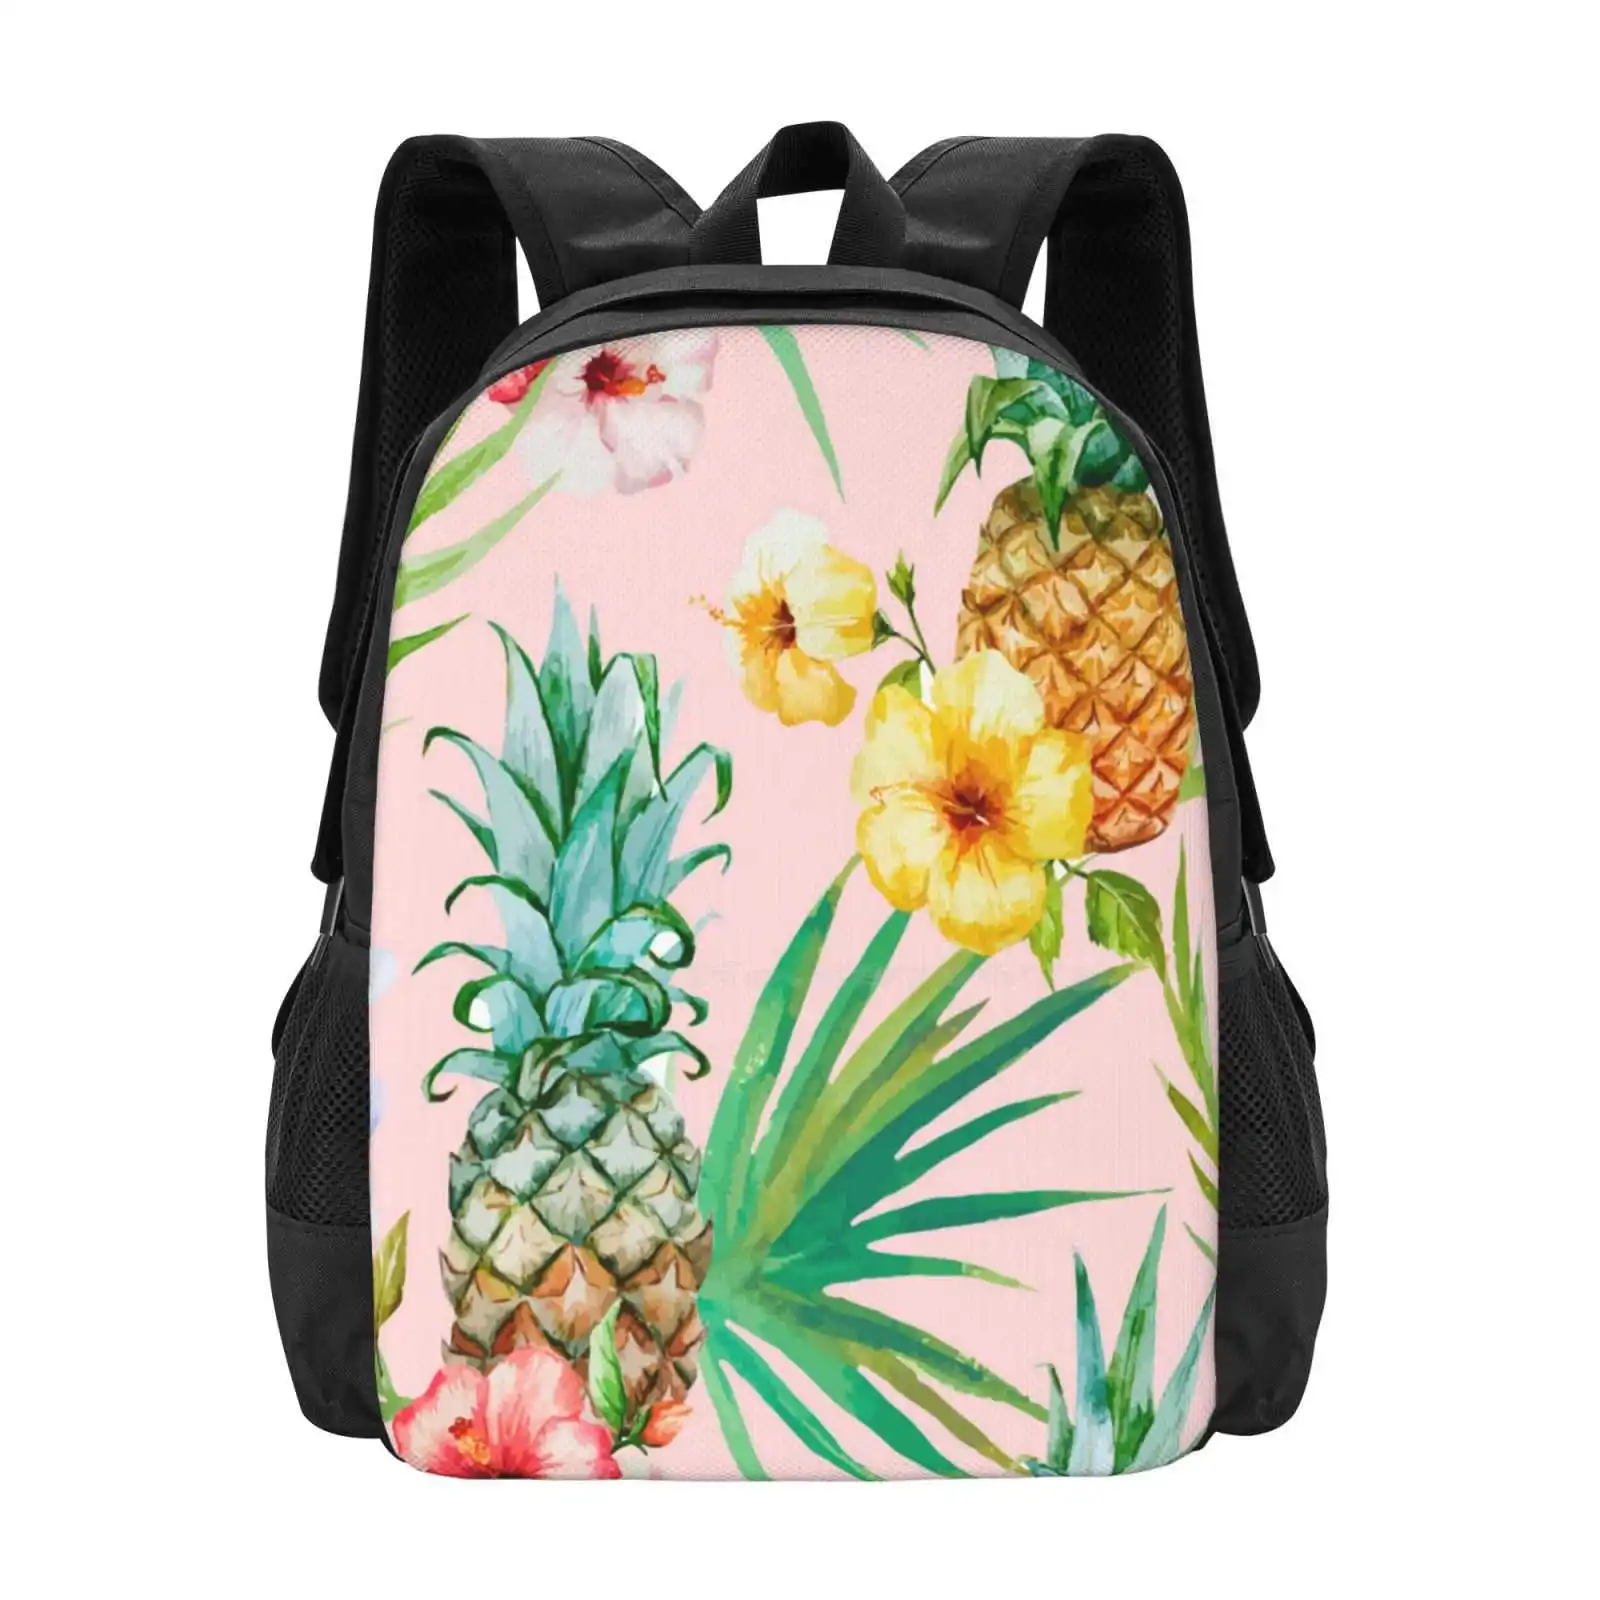 

Hawaii | Vintage Tropical Botanical Jungle | Floral Watercolor Blush Pastel Palm Painting Backpacks For School Teenagers Girls